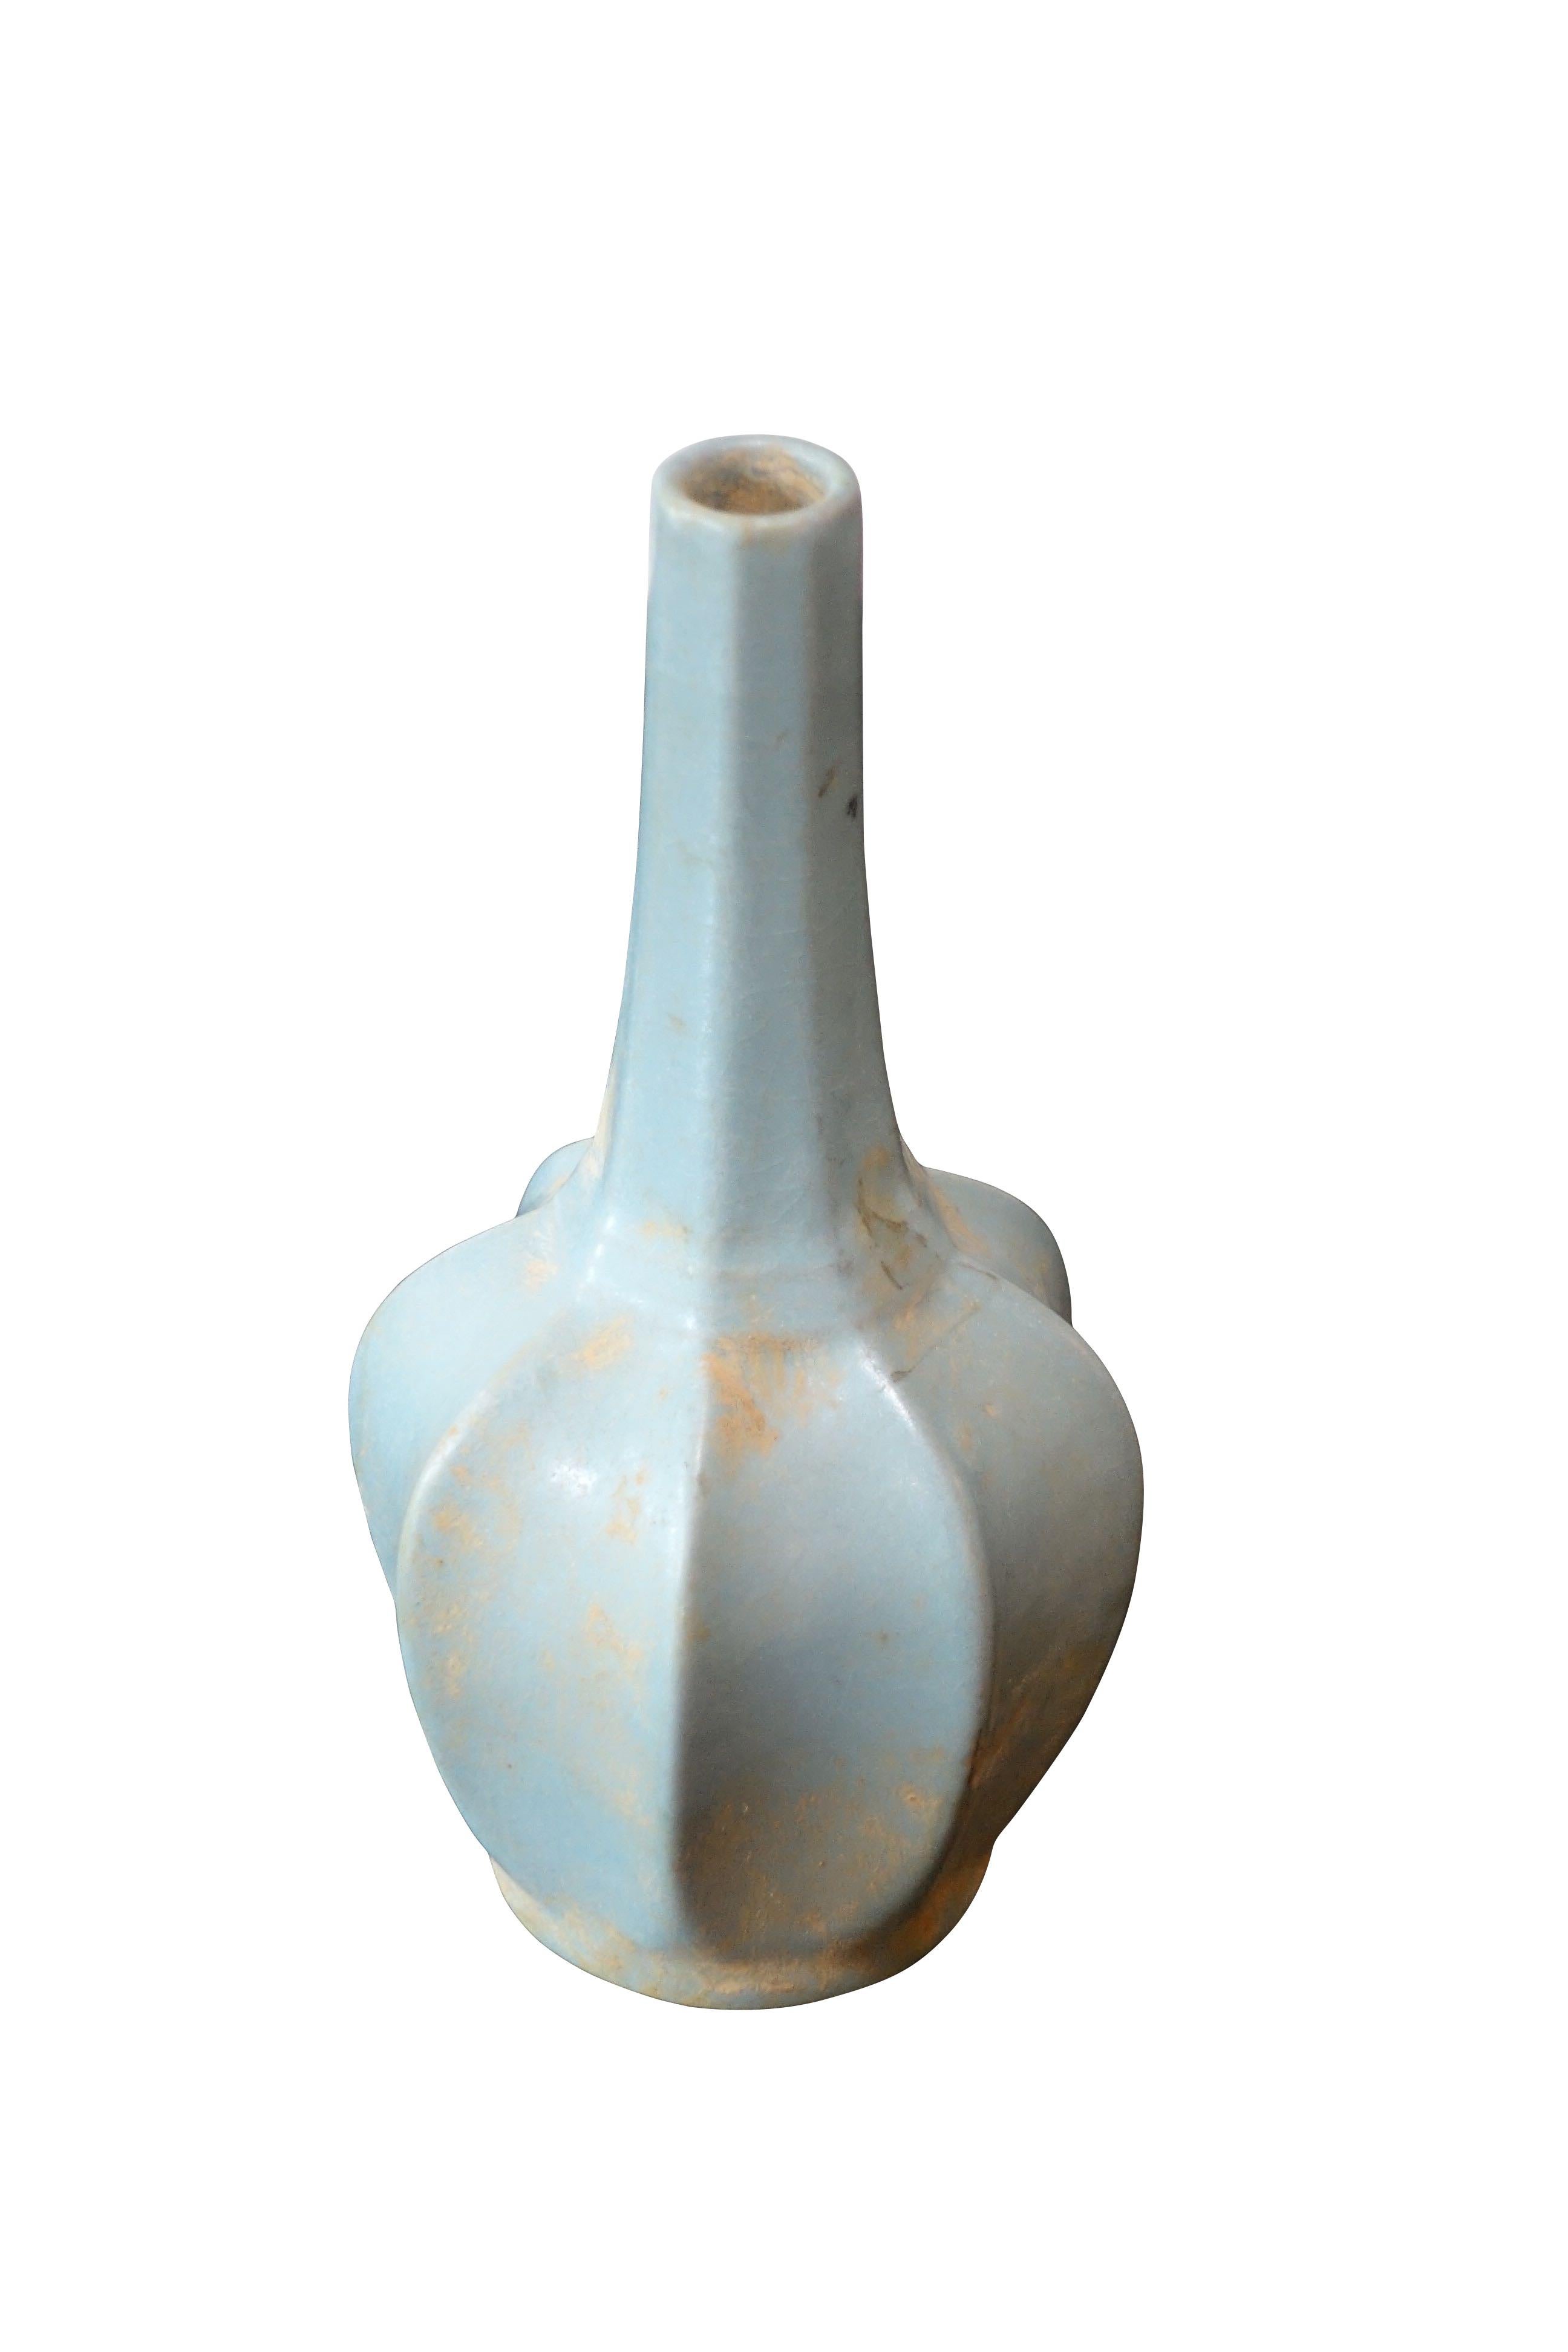 Collection Matte Glaze Pale Turquoise Vases, China, Contemporary 2